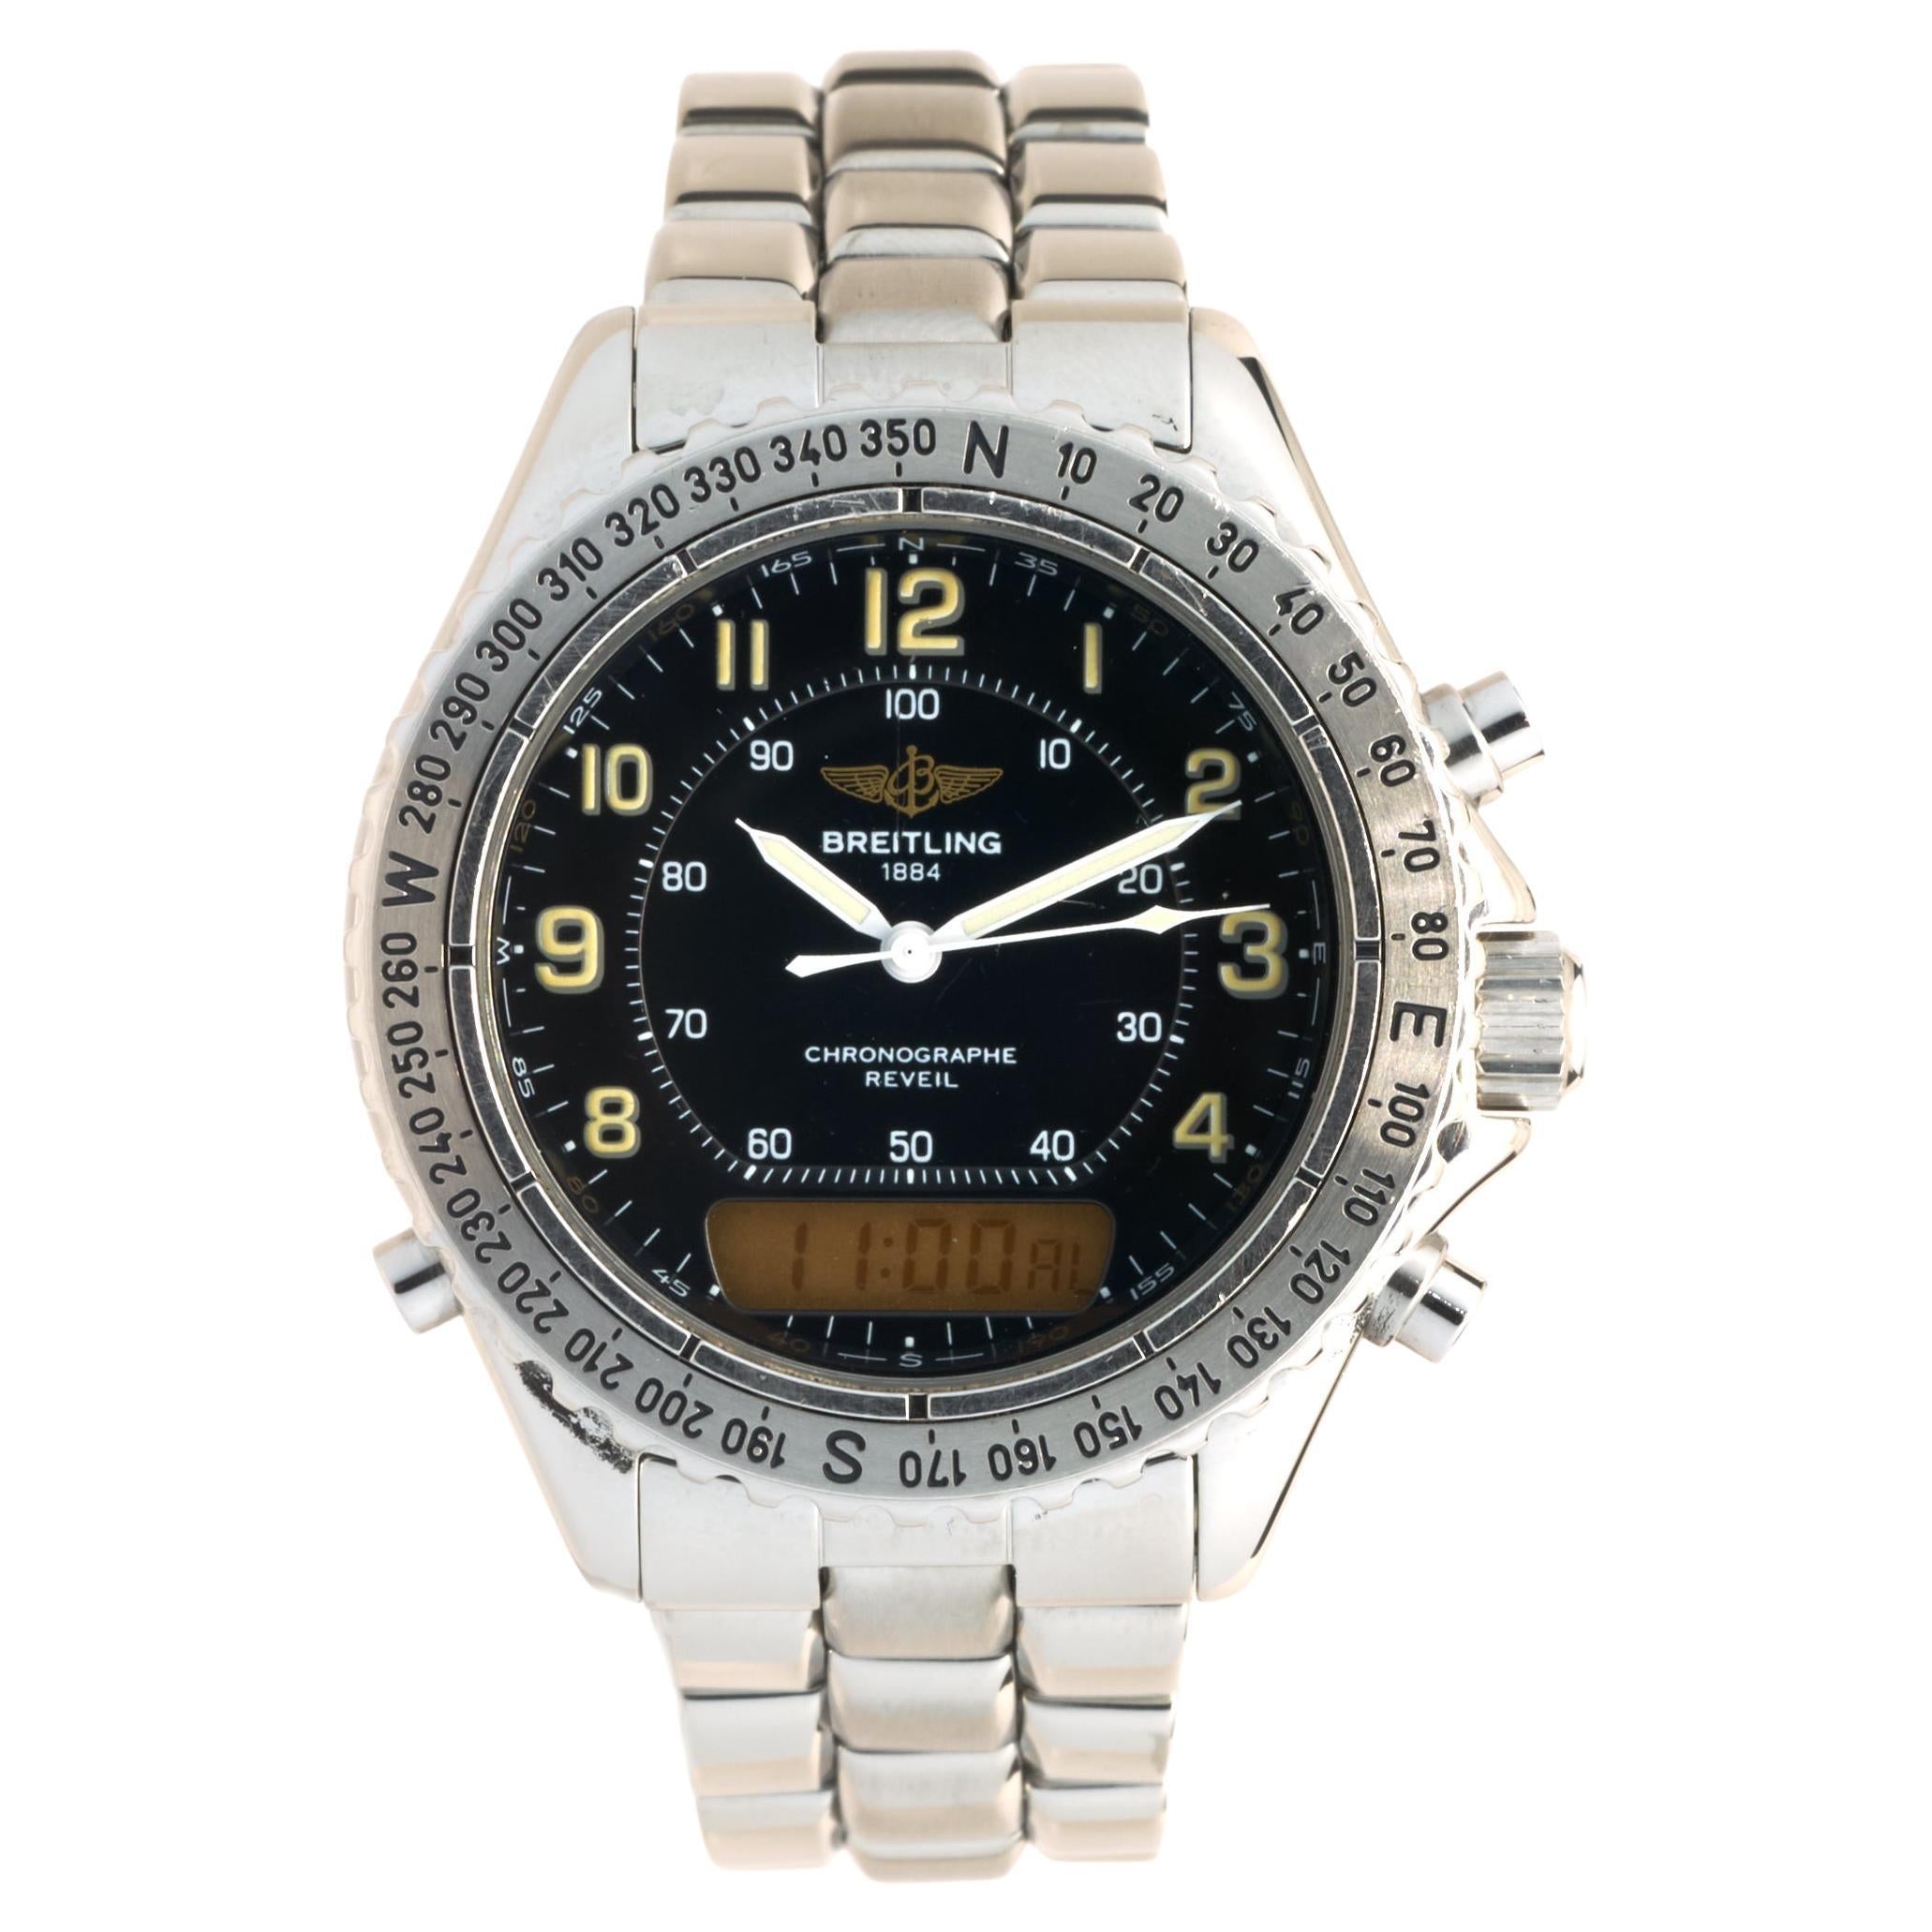 Breitling 1884 Watch - 4 For Sale on 1stDibs | breitling 1884 price,  breitling chronometre navitimer 1884 price, breitling watch 1884  chronograph price